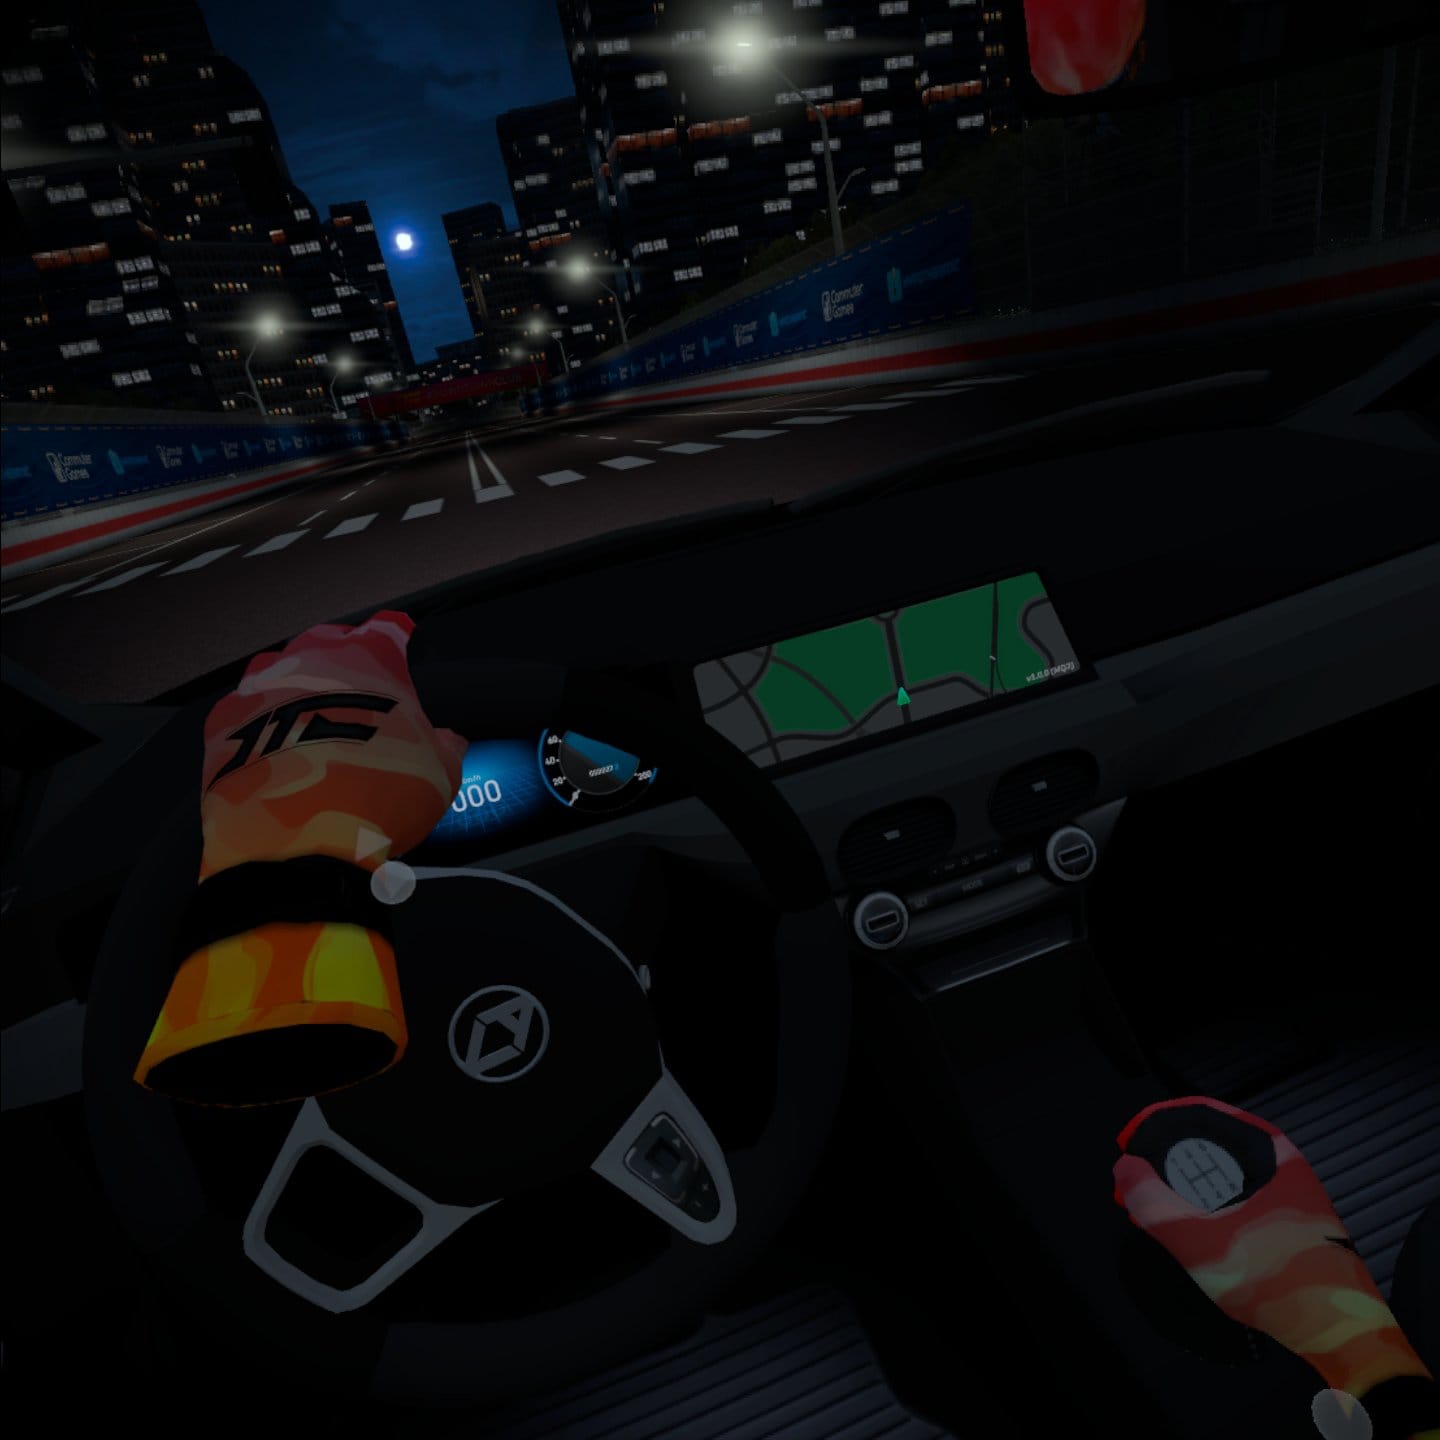 Downtown Club at night, a driver sits in the driver's seat with hands on the steering wheel and shifter.